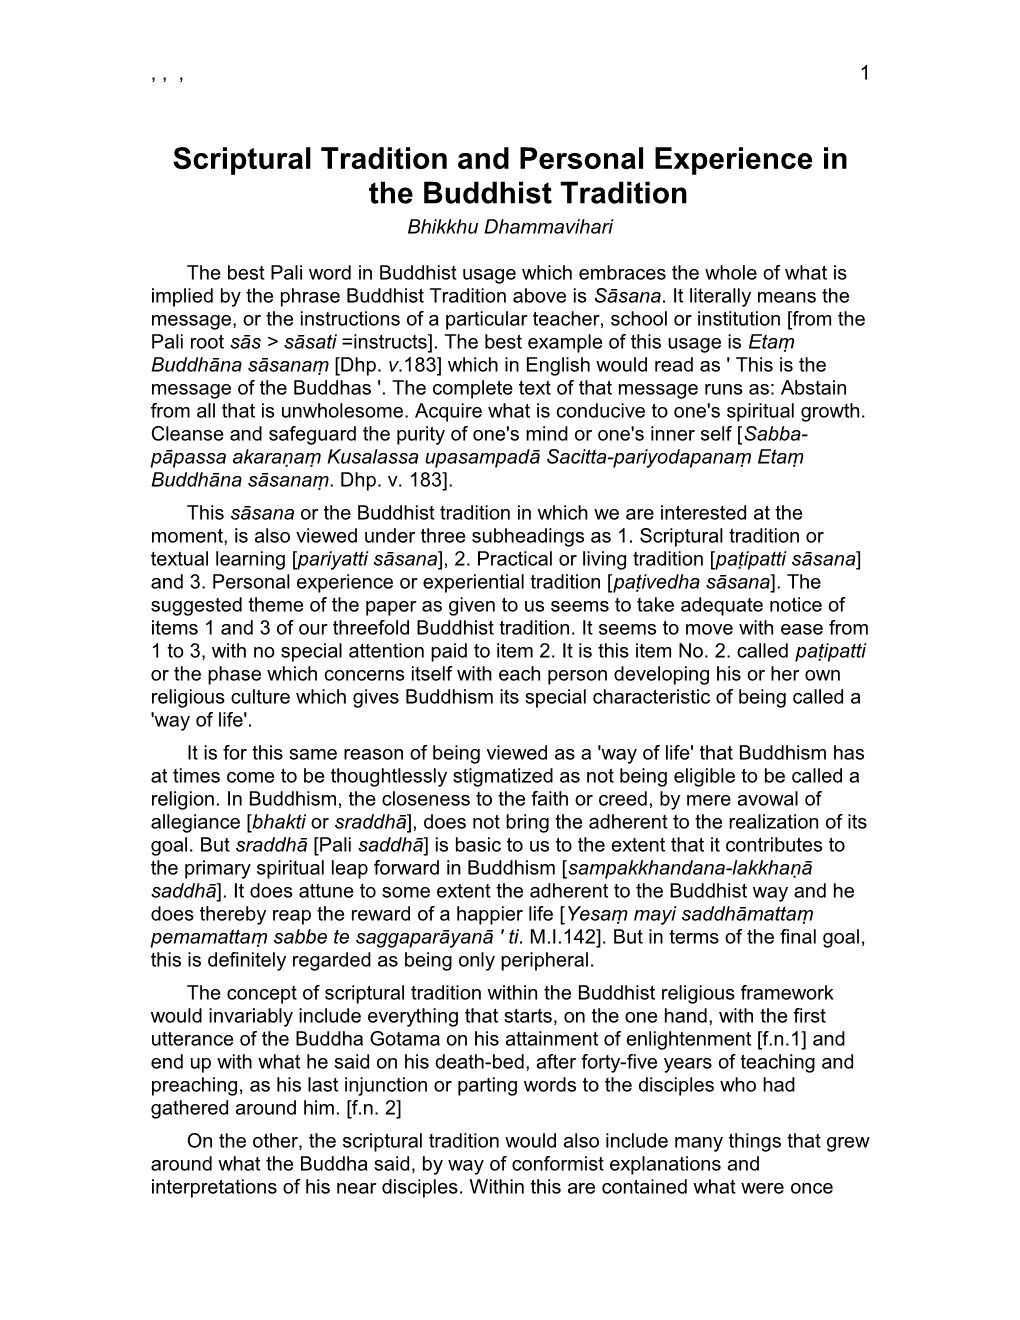 Scriptural Tradition and Personal Experience in the Buddhist Tradition